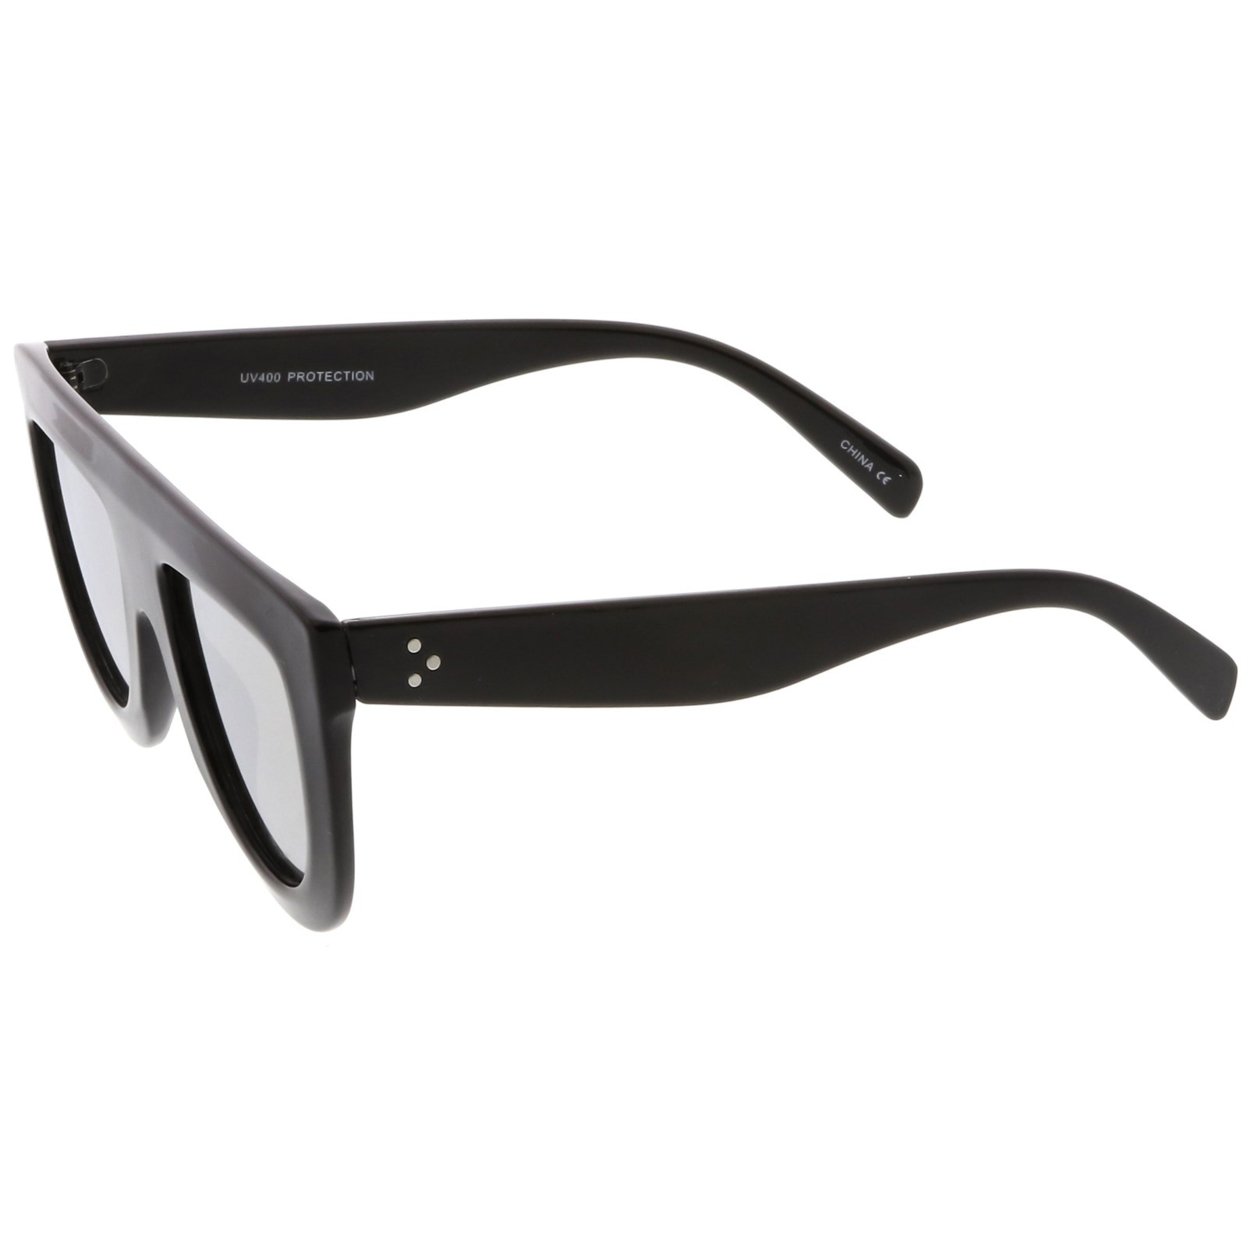 Oversize Chunky Wide Arms Colored Mirrror Flat Lens Flat Top Sunglasses 51mm - Black / Silver Mirror